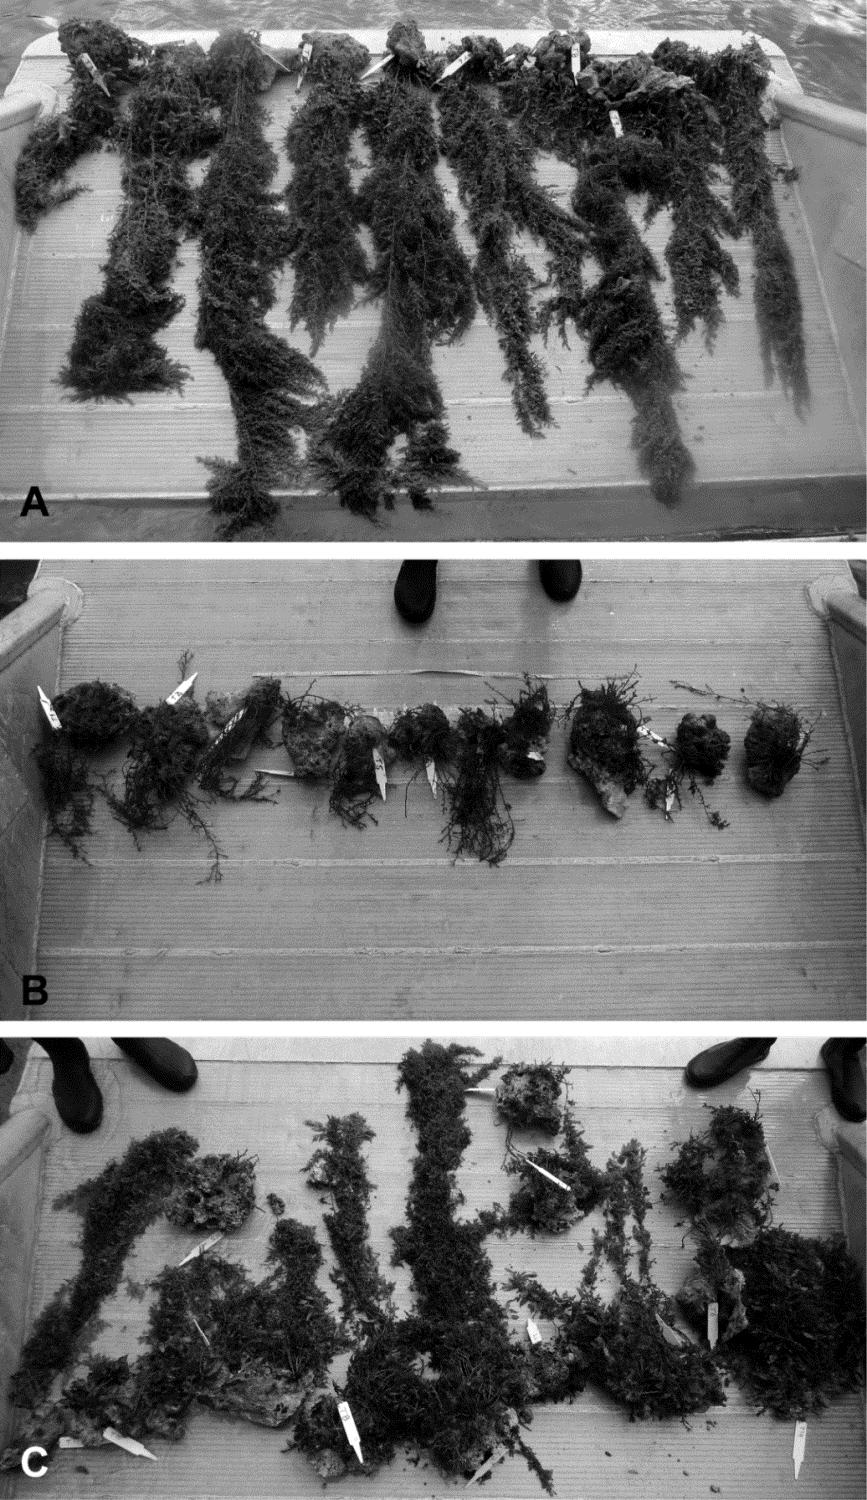 Appendix 1 Figure A1.1. A Standard macroalgal bioassays upon deployment. B Macroalgal bioassays collected 24 hours later for every deployment 1996-2010 (and 2011-2013 second annual deployments).